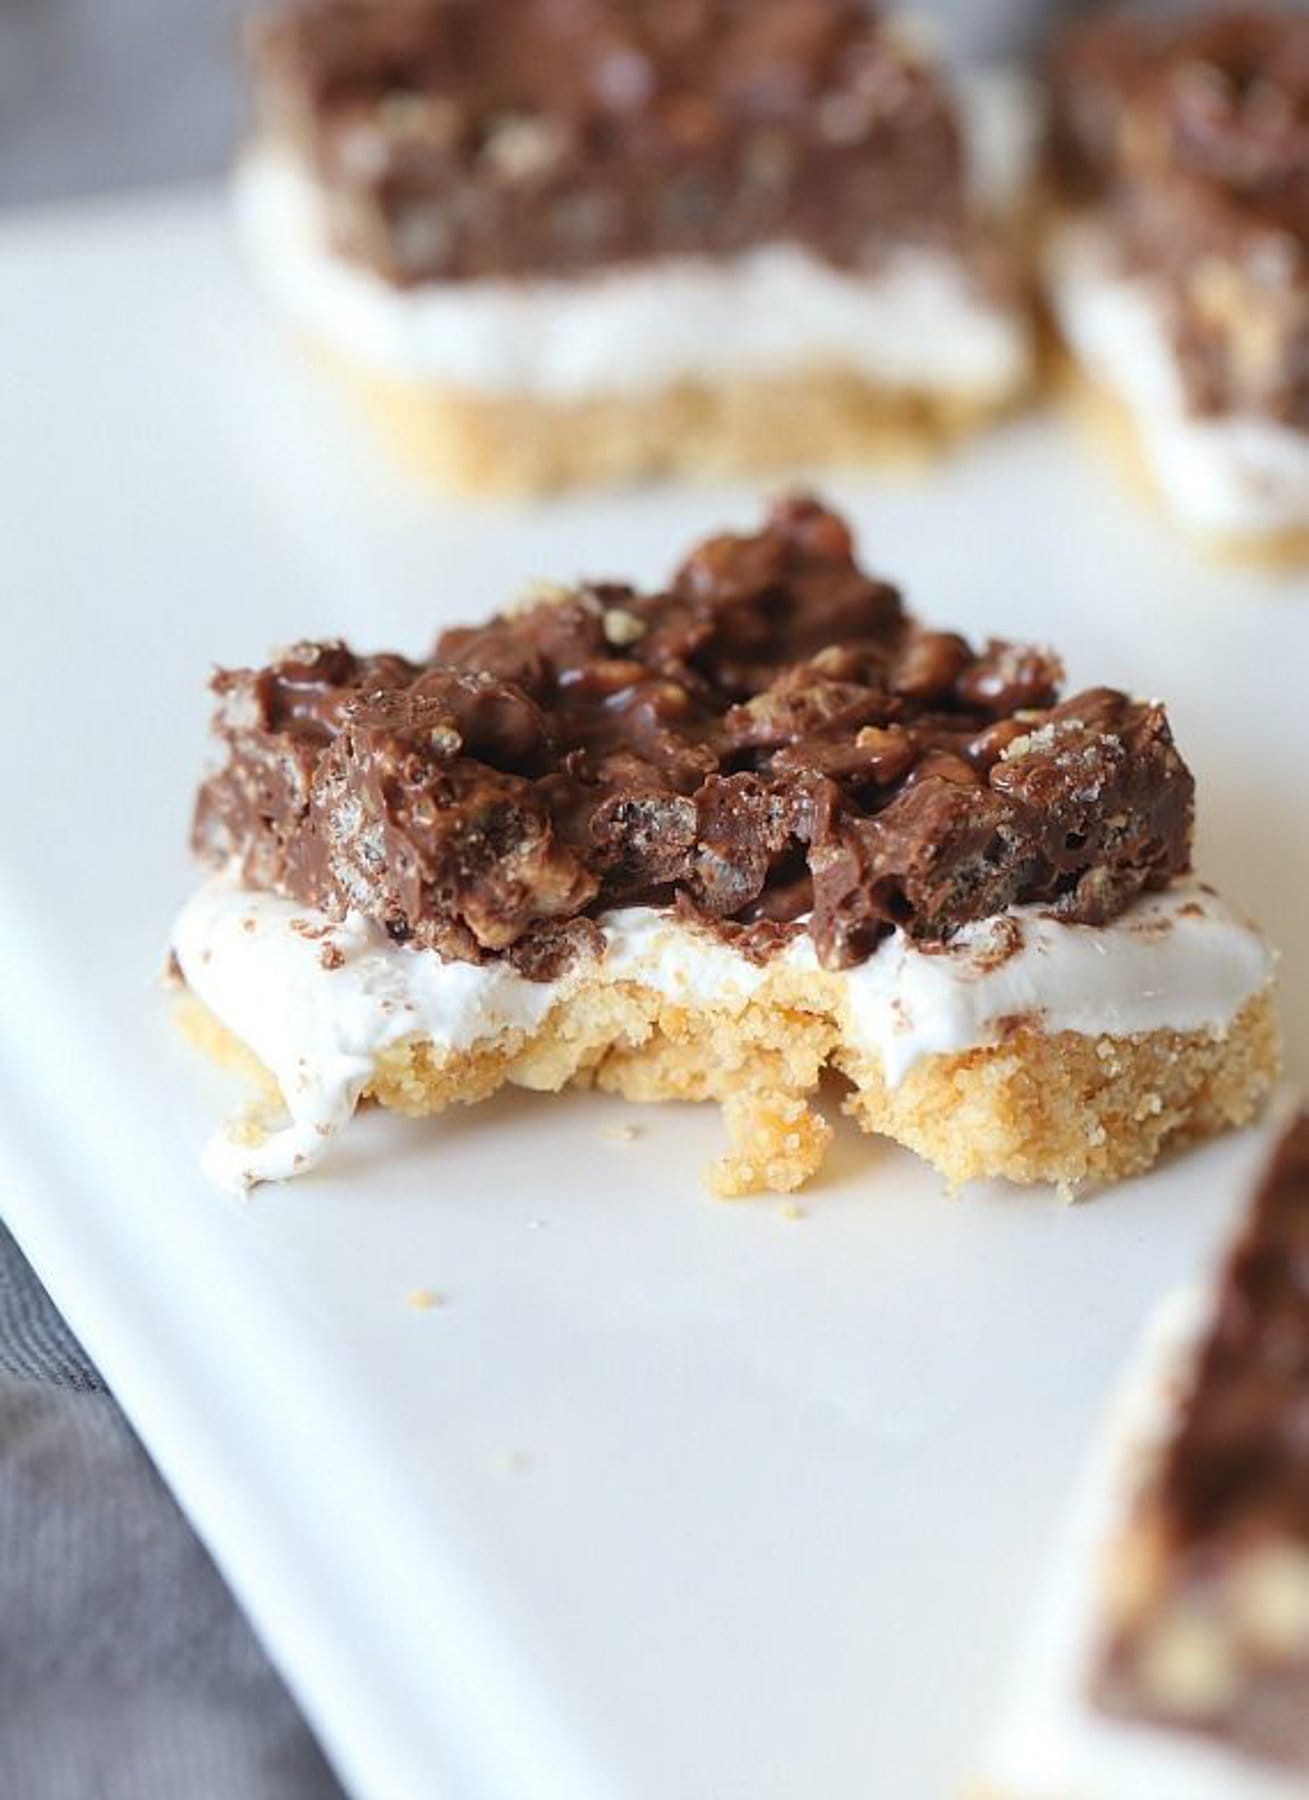 Crispy Ritz Smores bars with a bite taken out of it